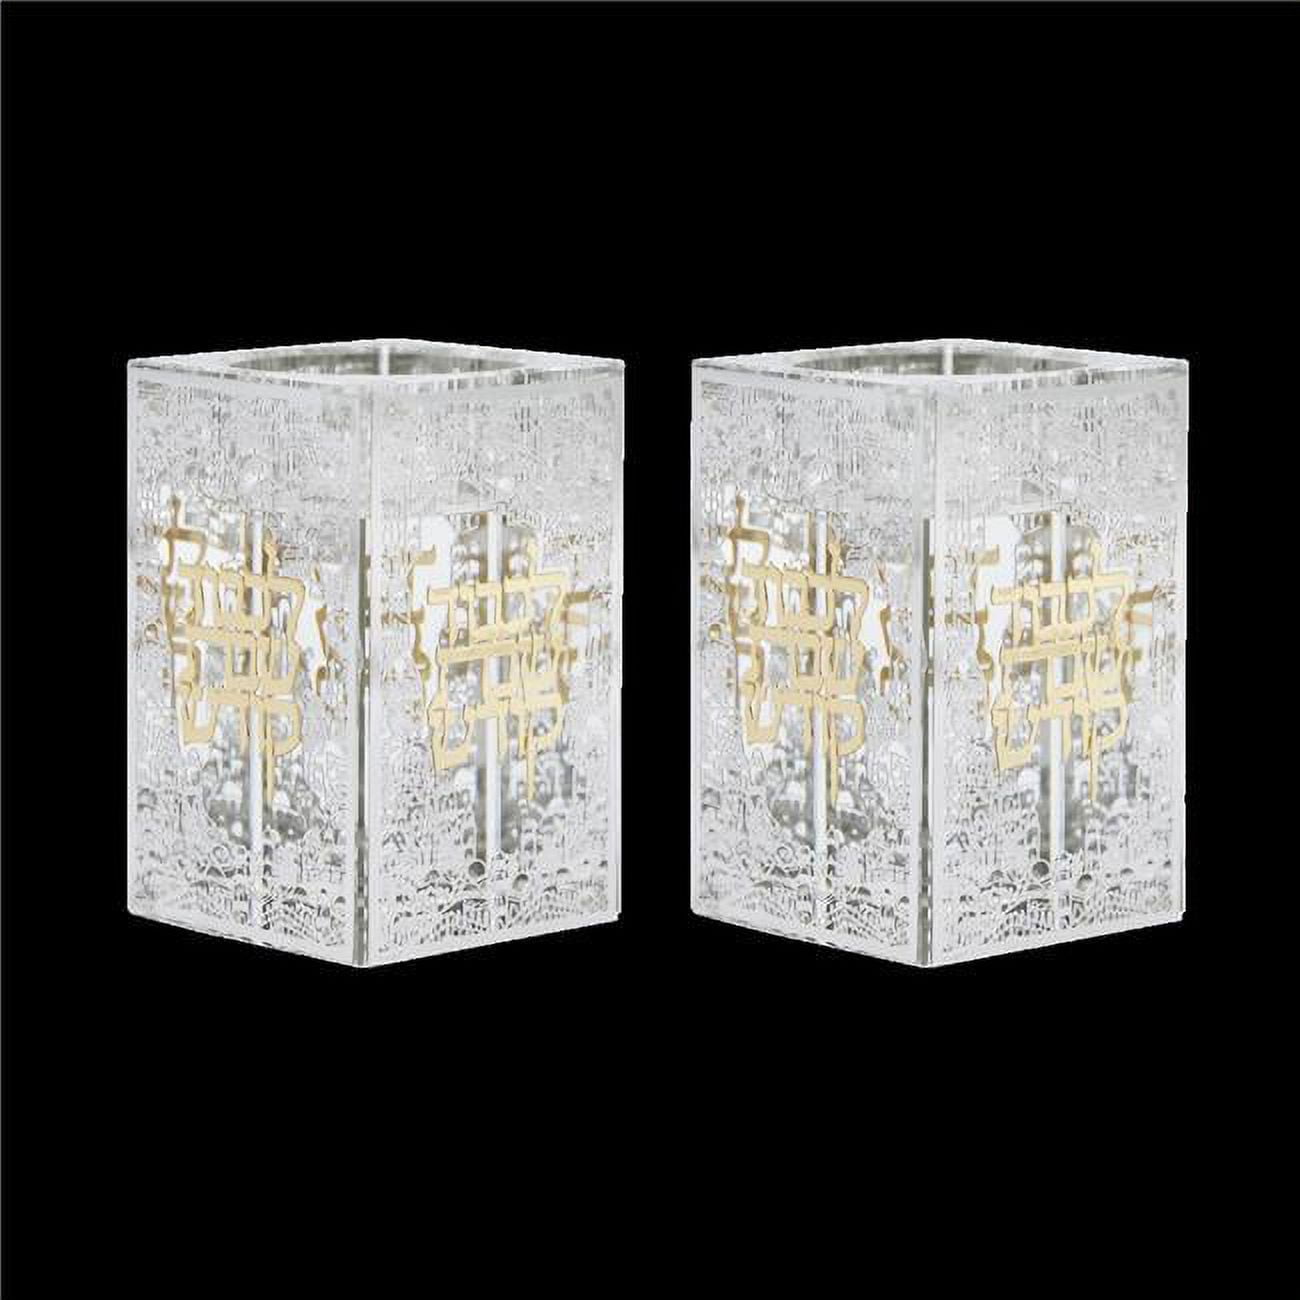 Picture of Schonfeld Collection 160176 3 x 2 x 2 in. Crystal Tea Light Holders with Silver Jerusalem & Gold Shabbat Kodesh